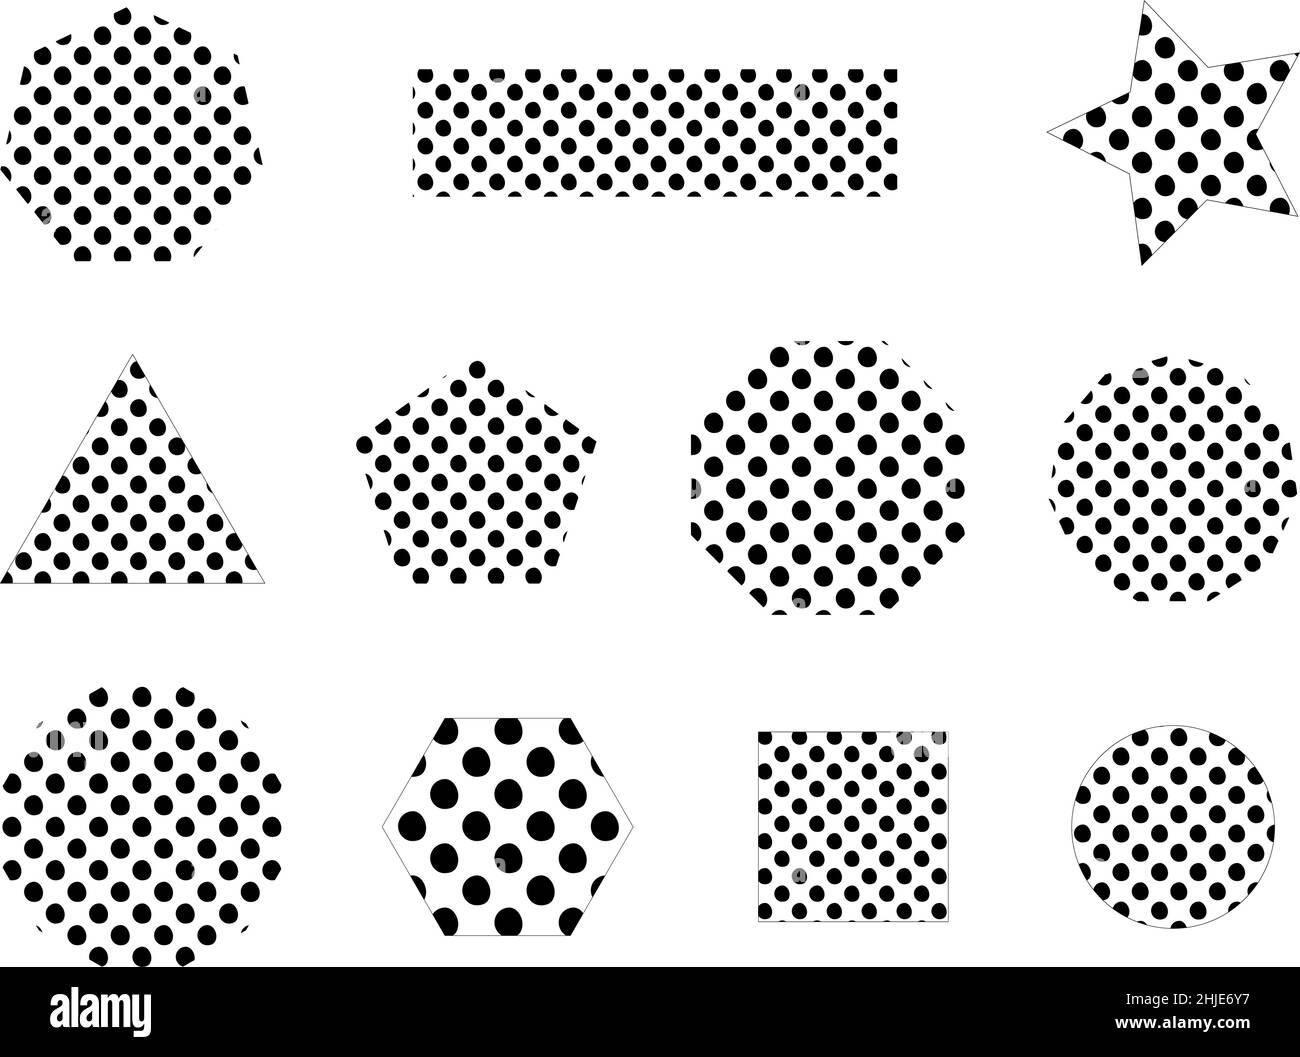 dot-seamless-pattern-download-free-vector-art-stock-graphics-images